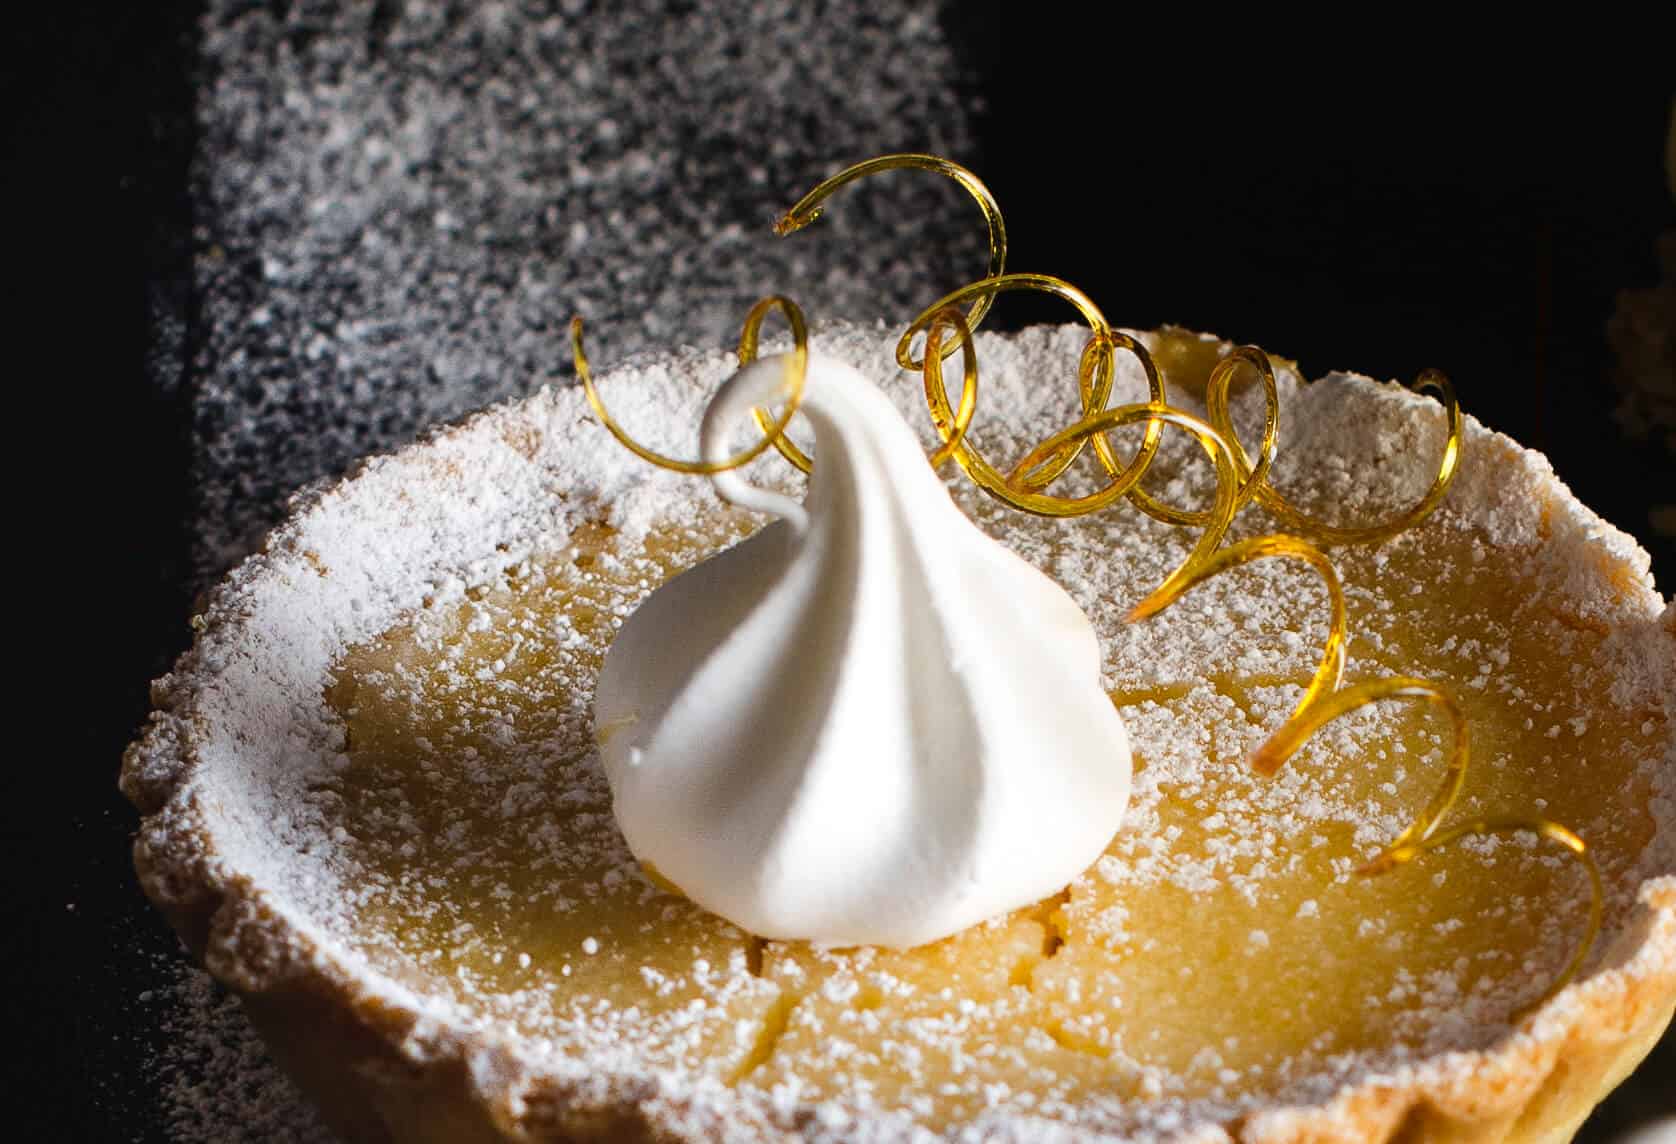 lemon tart with ice cream on a black plate with sugar spirals and a merengue